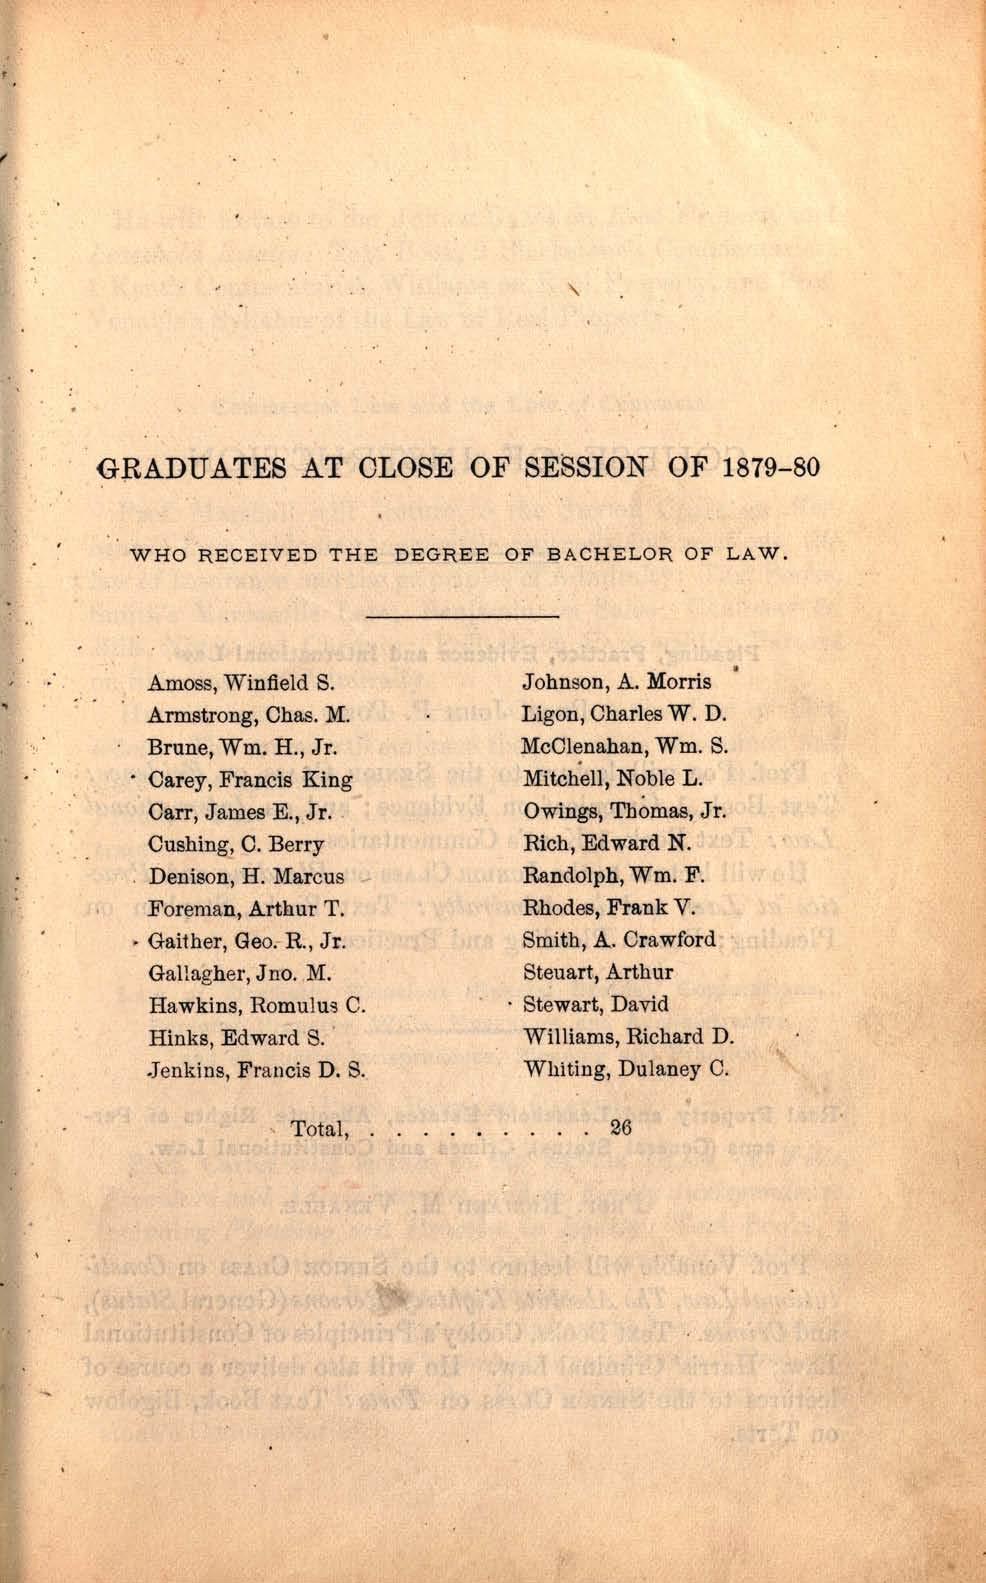 GRADUATES AT CLOSE OF SESSION OF 1879-80 WHO RECEIVED THE DEGREE OF BACHELOR OF LAW. Amoss, Winfield S. Johnson, A. Morris Armstrong, Chas. M. Ligon, Charles W. D. Brune, Wm. H., Jr. McClenahan, Wm.